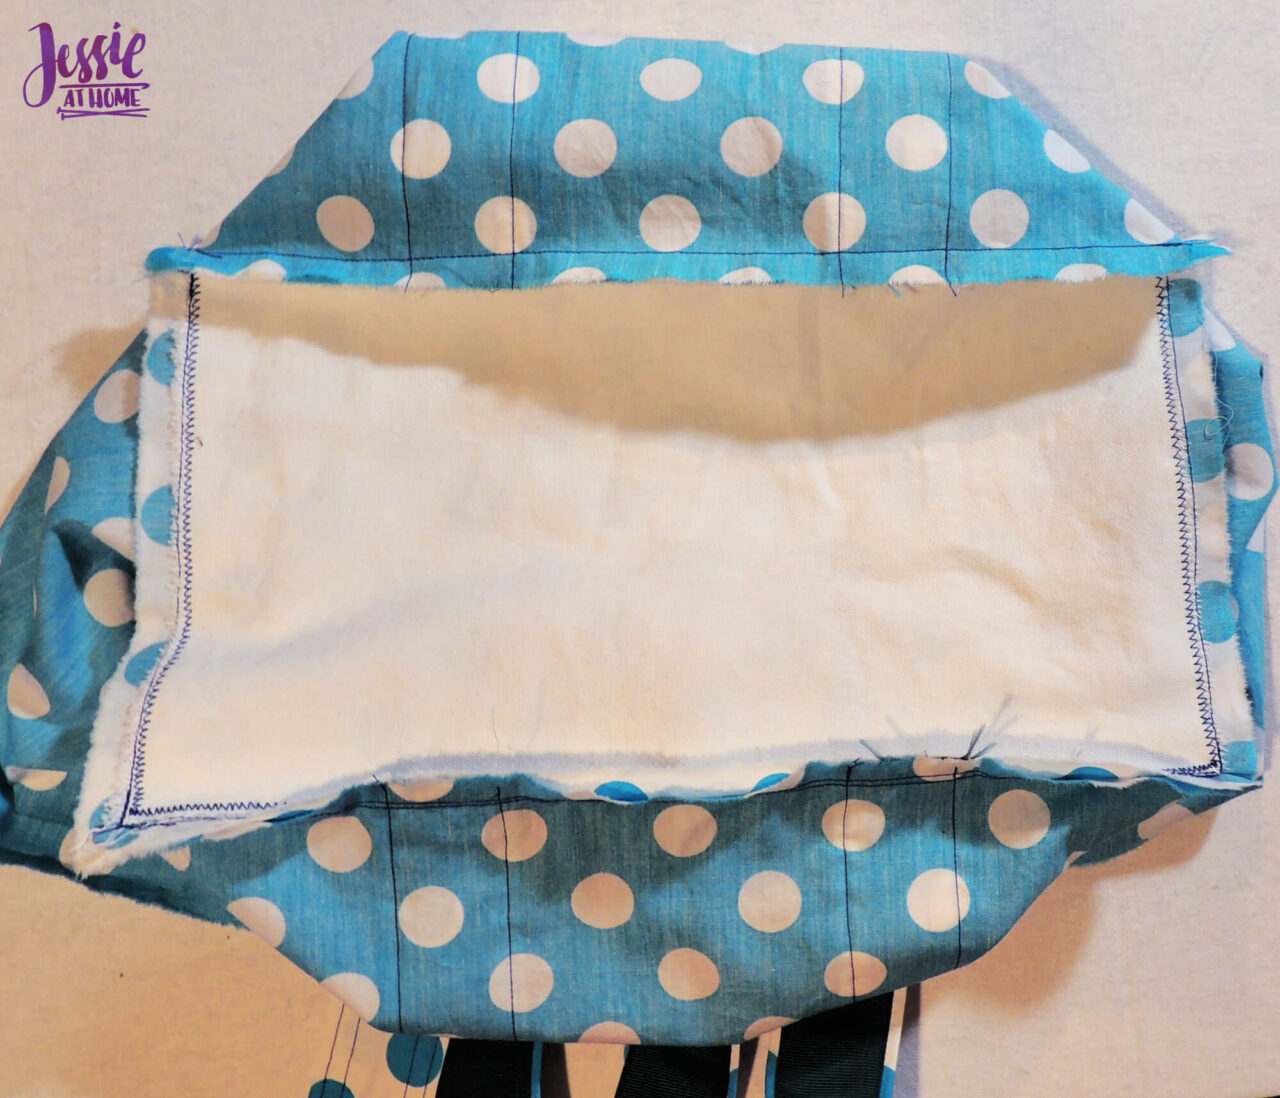 Washable Grocery Bags Sewing Tutorial - Jessie At Home